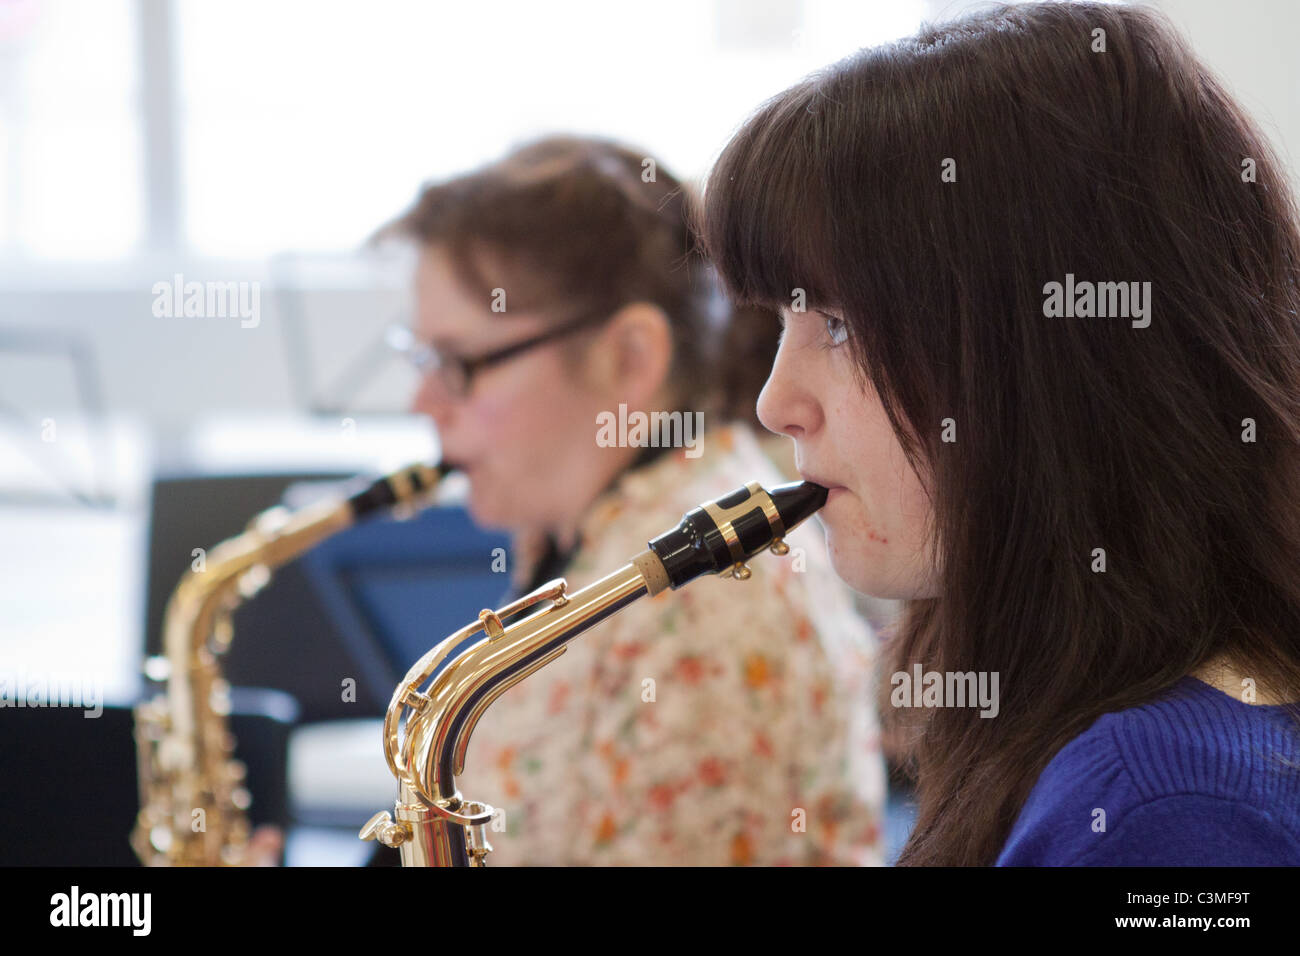 Two saxophonists playing their alto saxophones in  a youth music group / orchestra / band to illustrate article on music, orchestras, youth, etc. Stock Photo